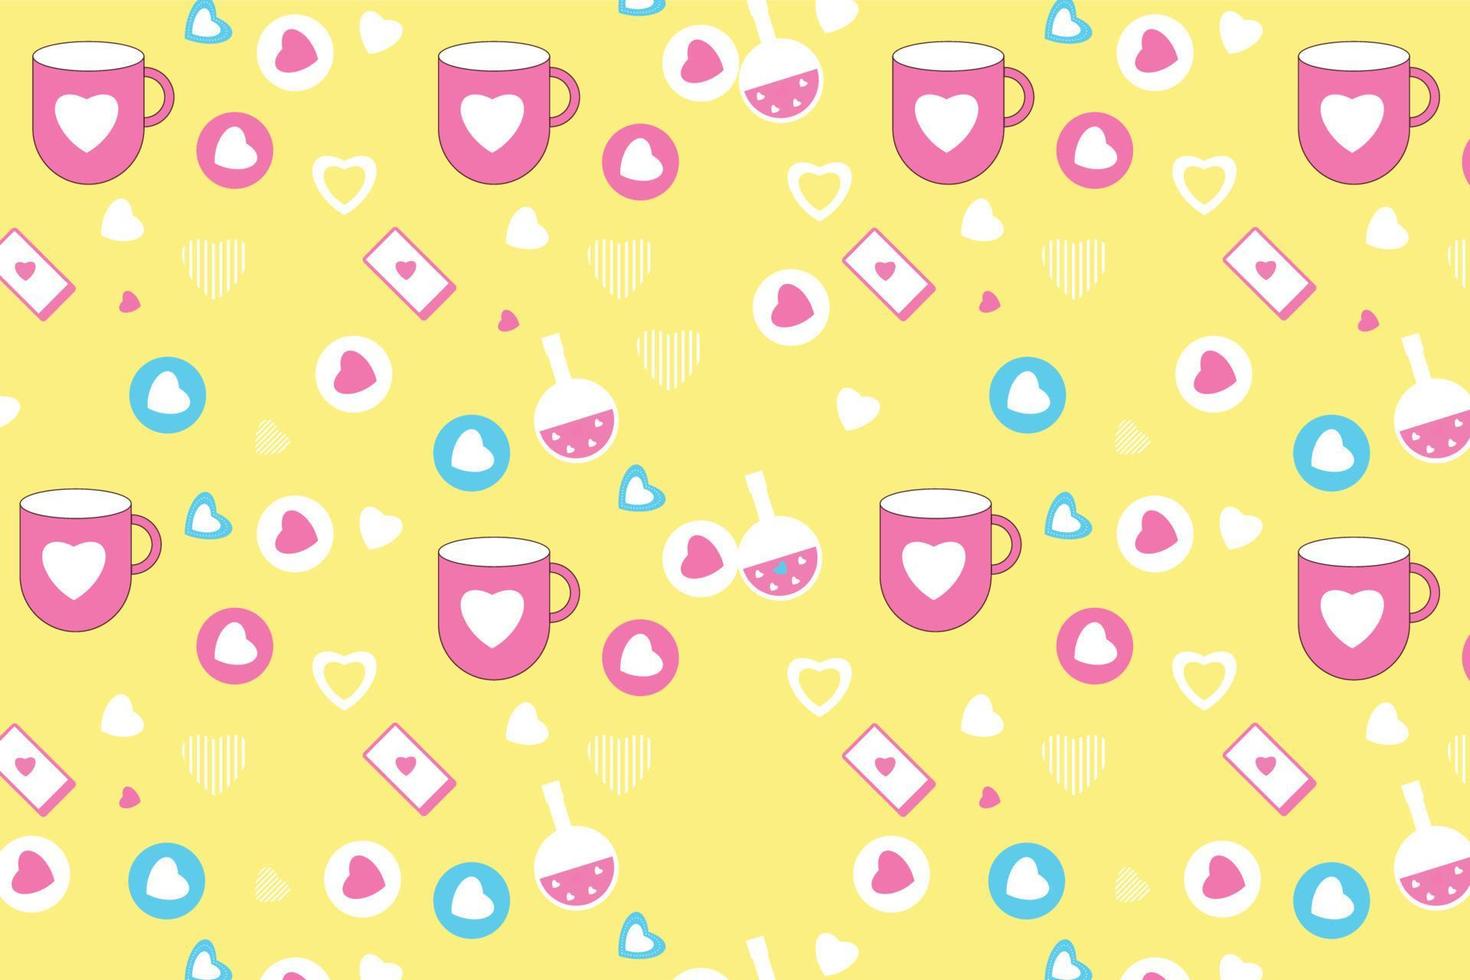 Abstract love pattern decoration element vector. Endless minimalist love pattern with different love shapes and coffee mugs on a yellow background. Seamless pattern element design for book covers. vector